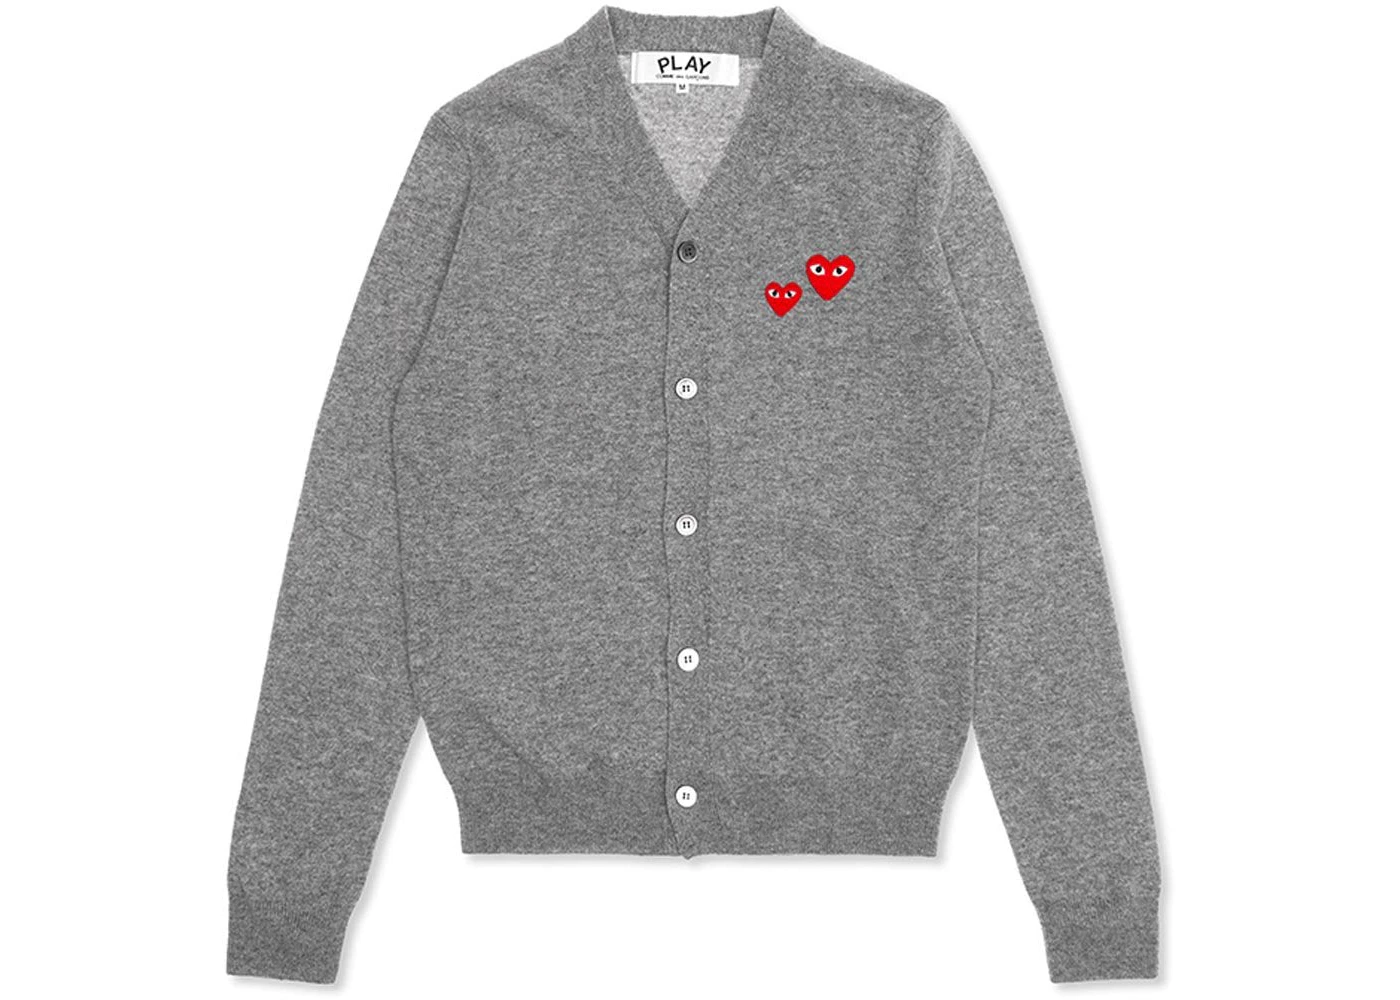 Comme des Garcons Play Double Heart Cardigan Sweater Grey Men's - US